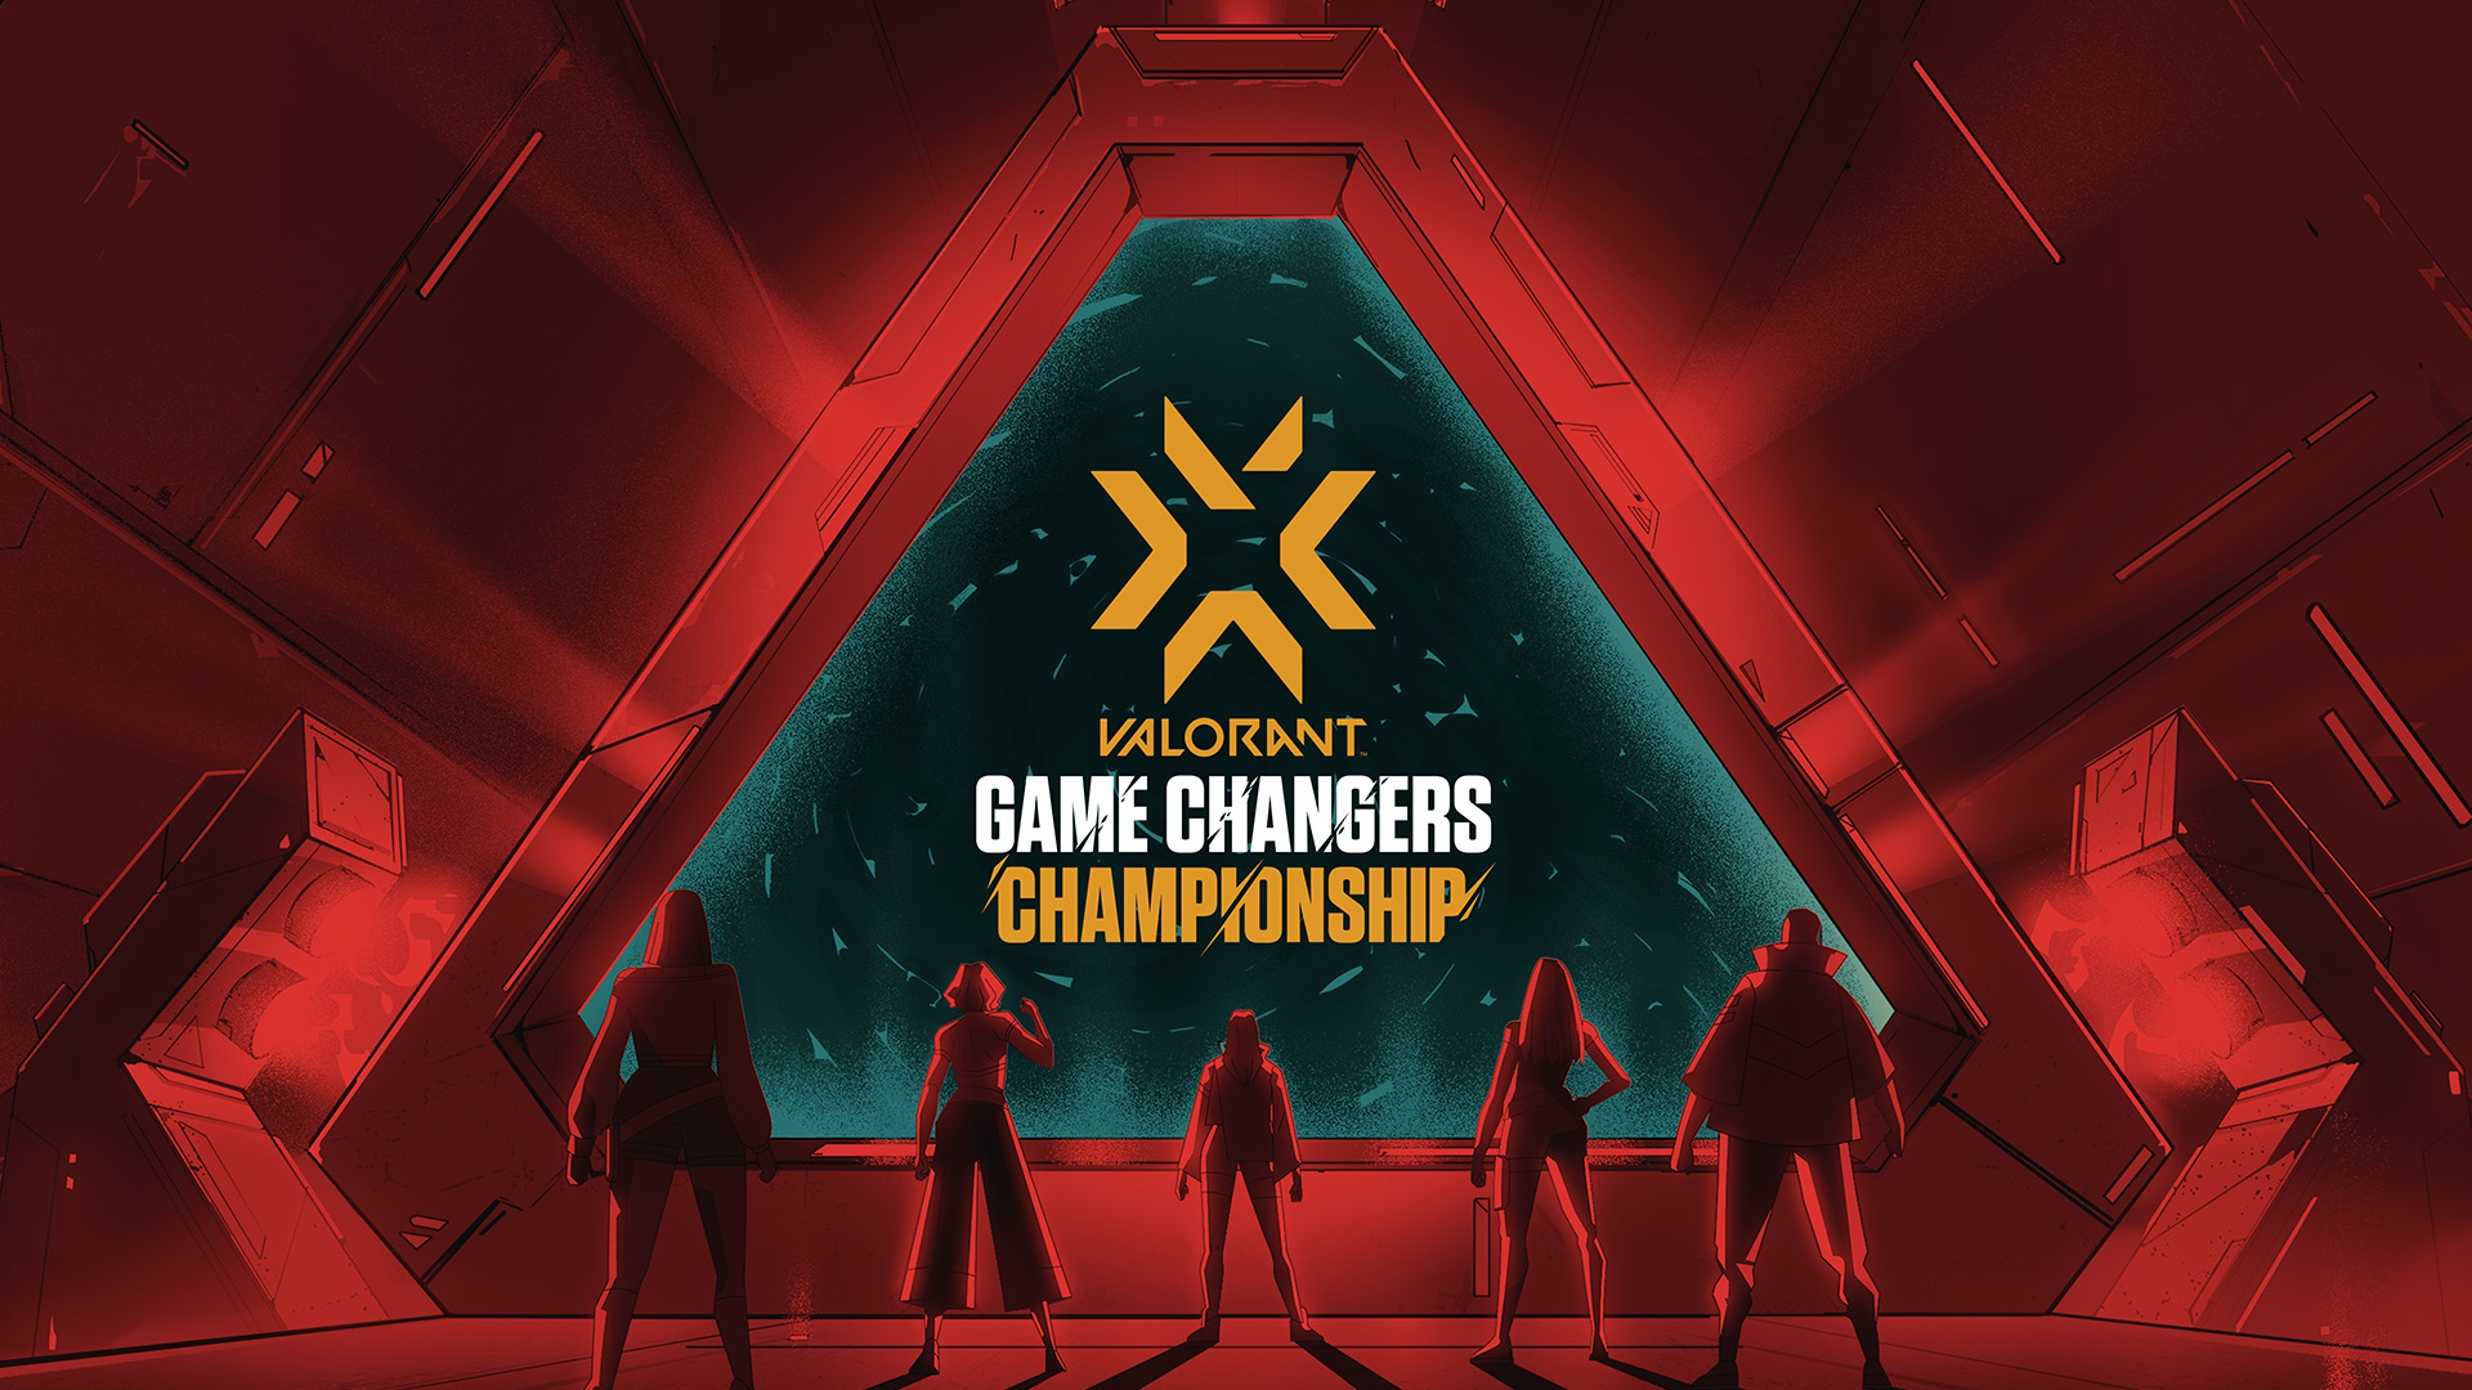 VALORANT GAME CHANGERS CHAMPIONSHIP : EVERYTHING YOU NEED TO KNOW